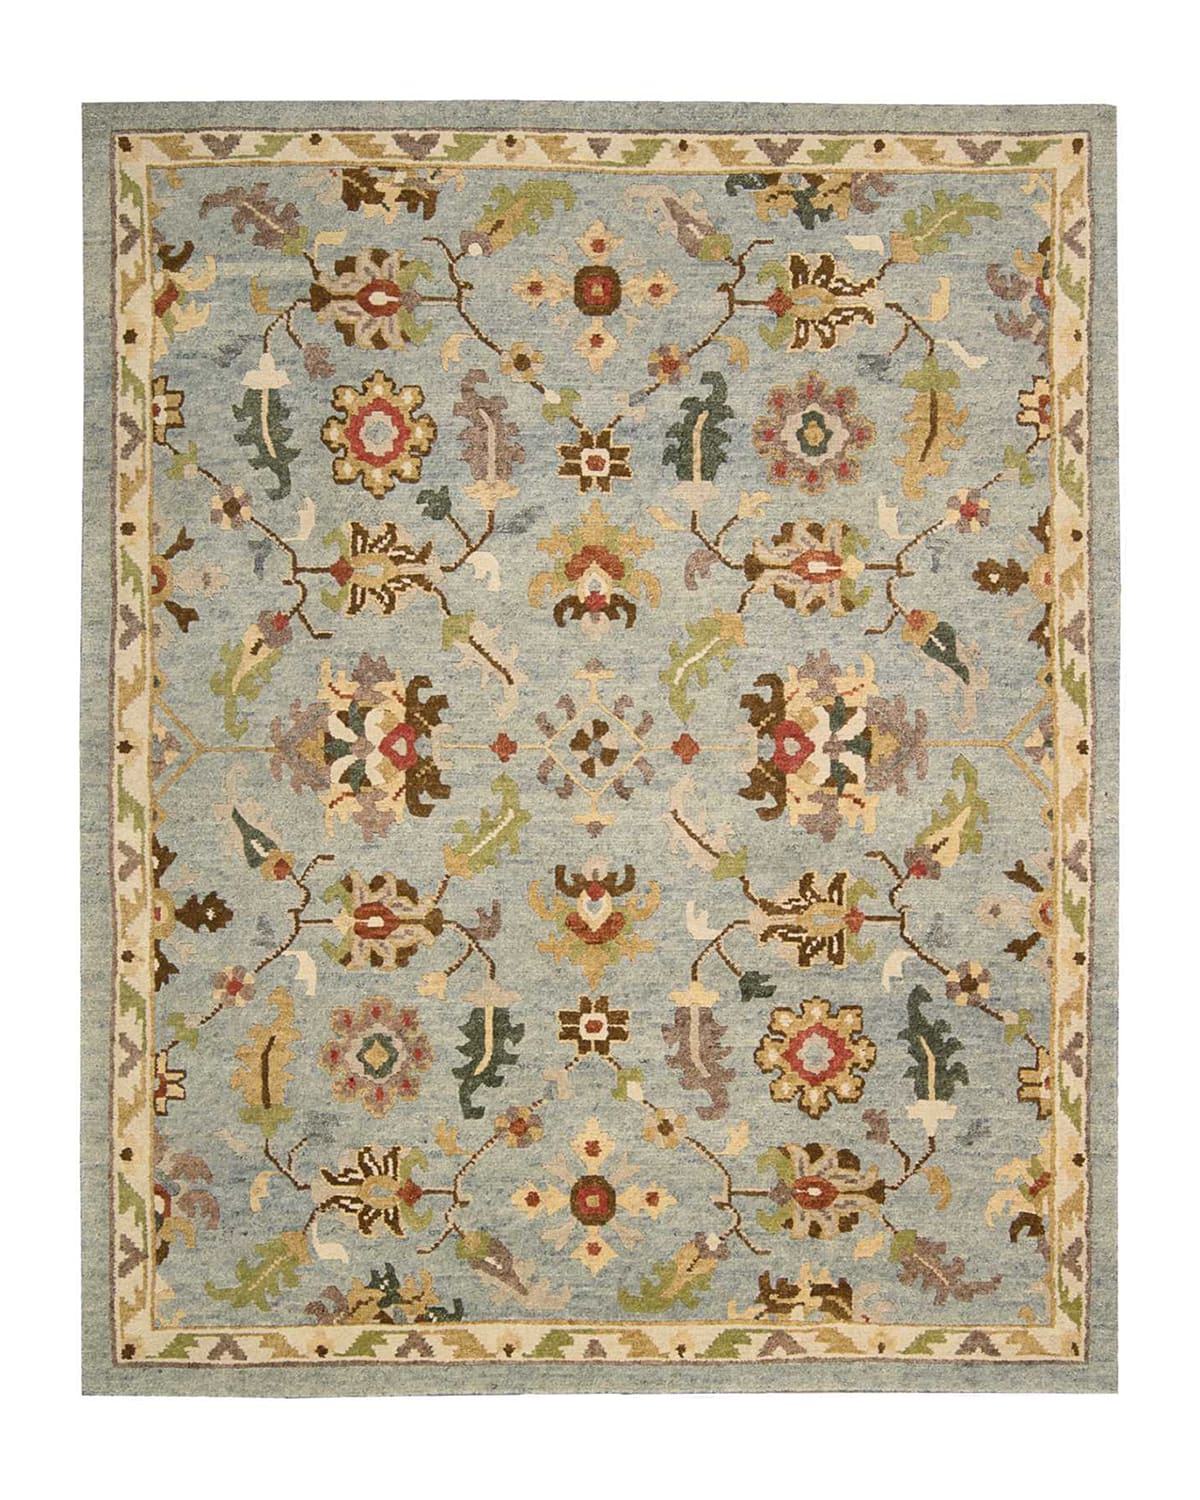 Echo Garden Rug, 6' x 9inin,Hand knotted in Tibetan style of hand-spun wool. Enhanced with a special wash to create a beautiful at RugsBySize.com